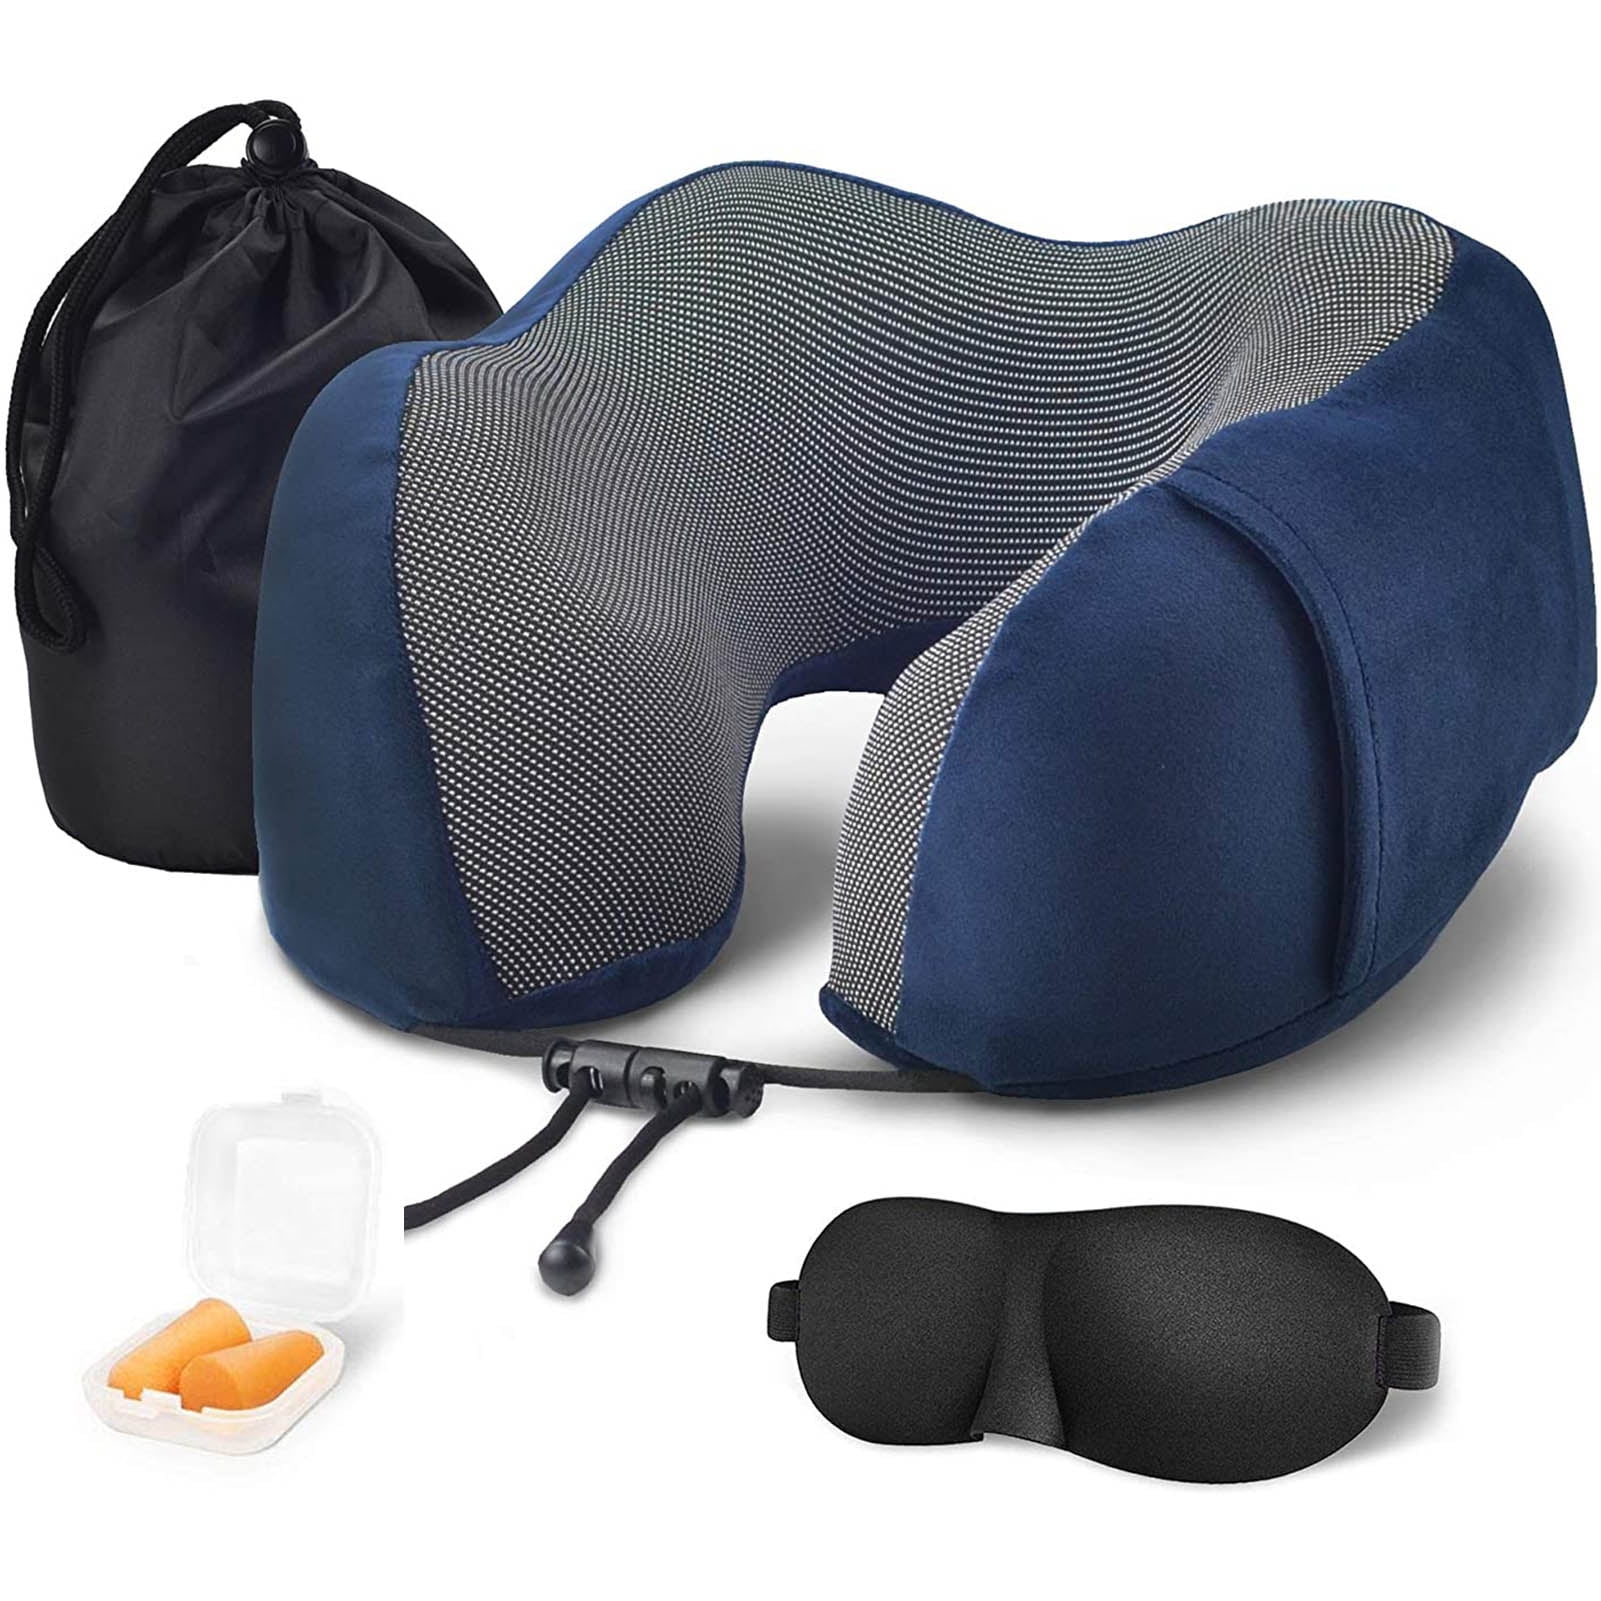 Betus Dreamer Comfort Inflatable Travel Pillow for Airplane Rest Pillow 1 Grey